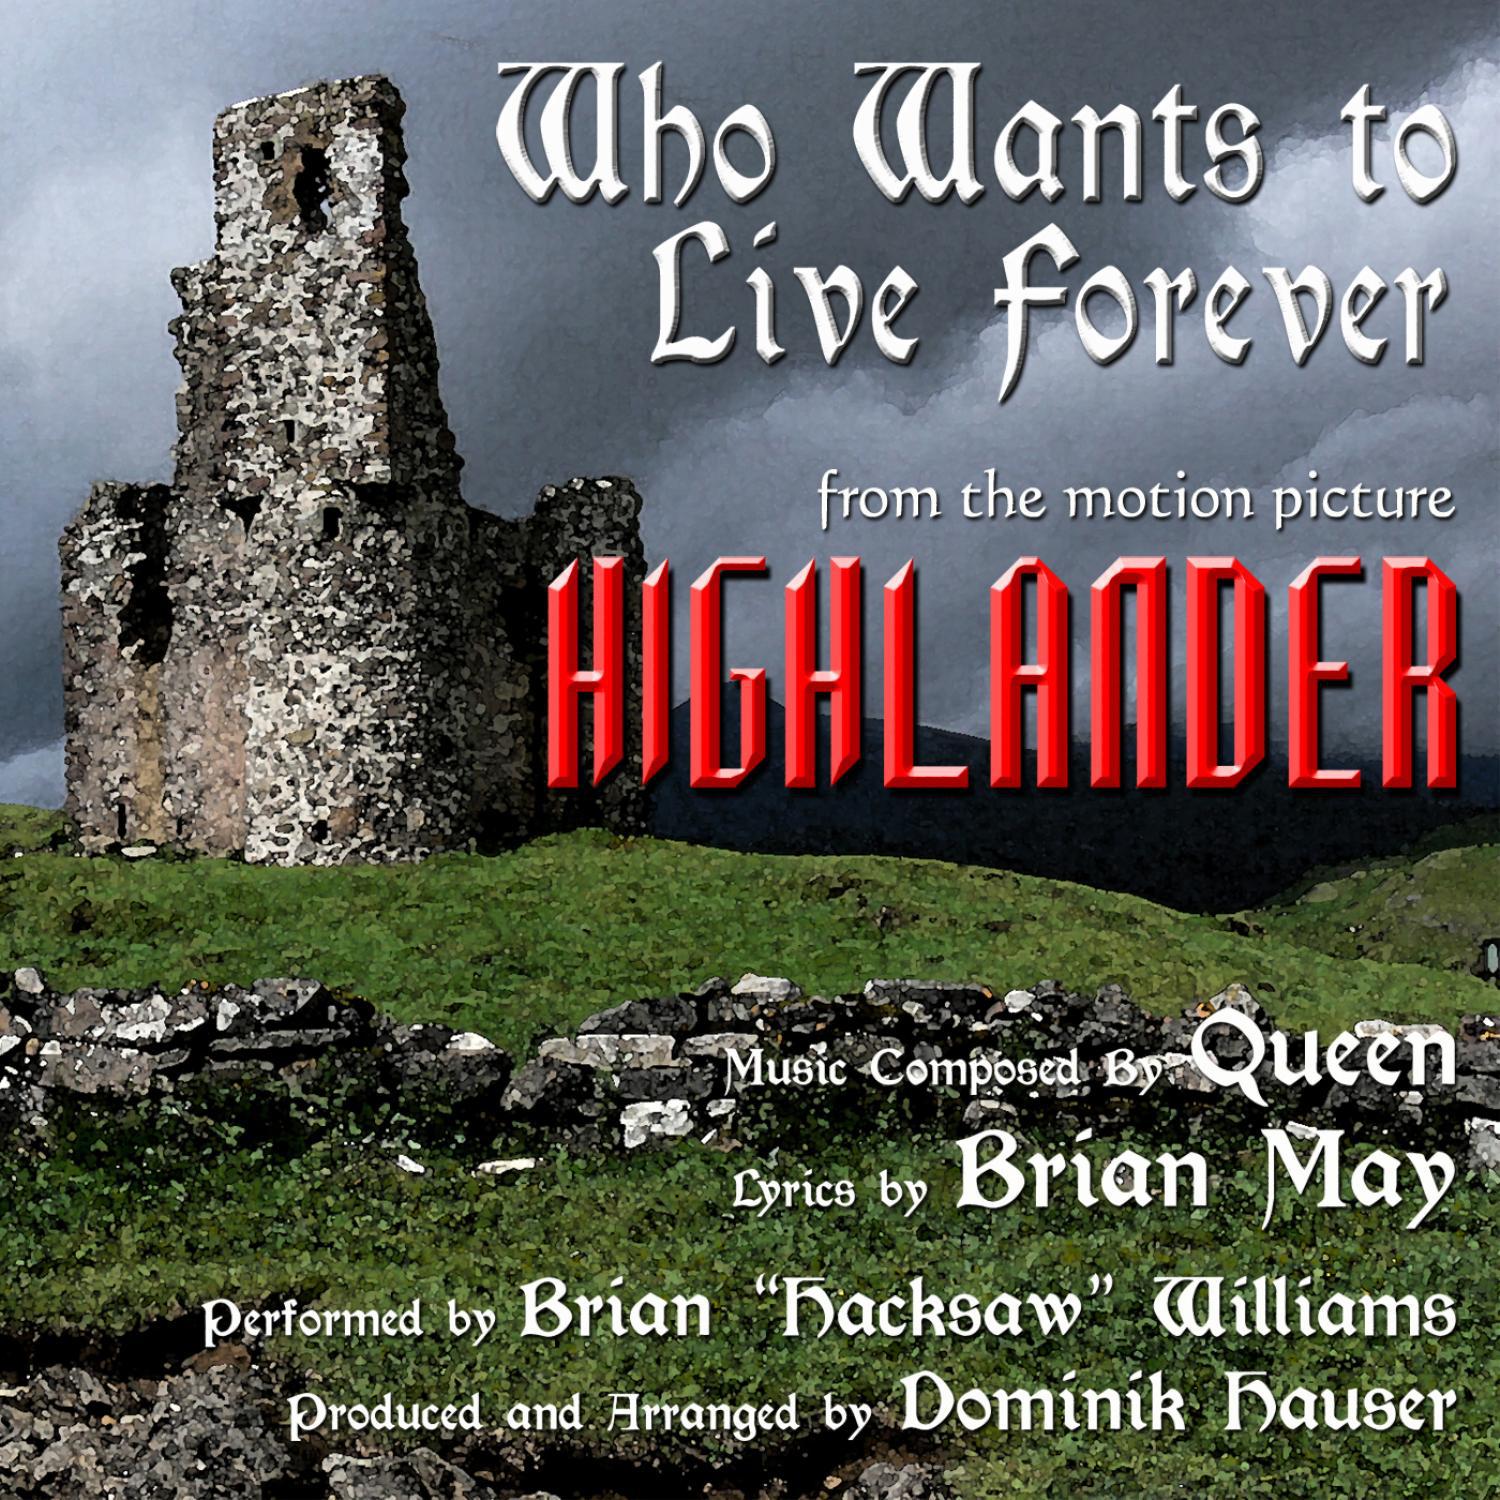 "Who Wants To Live Forever" from the Motion Picture "Highlander" By Queen